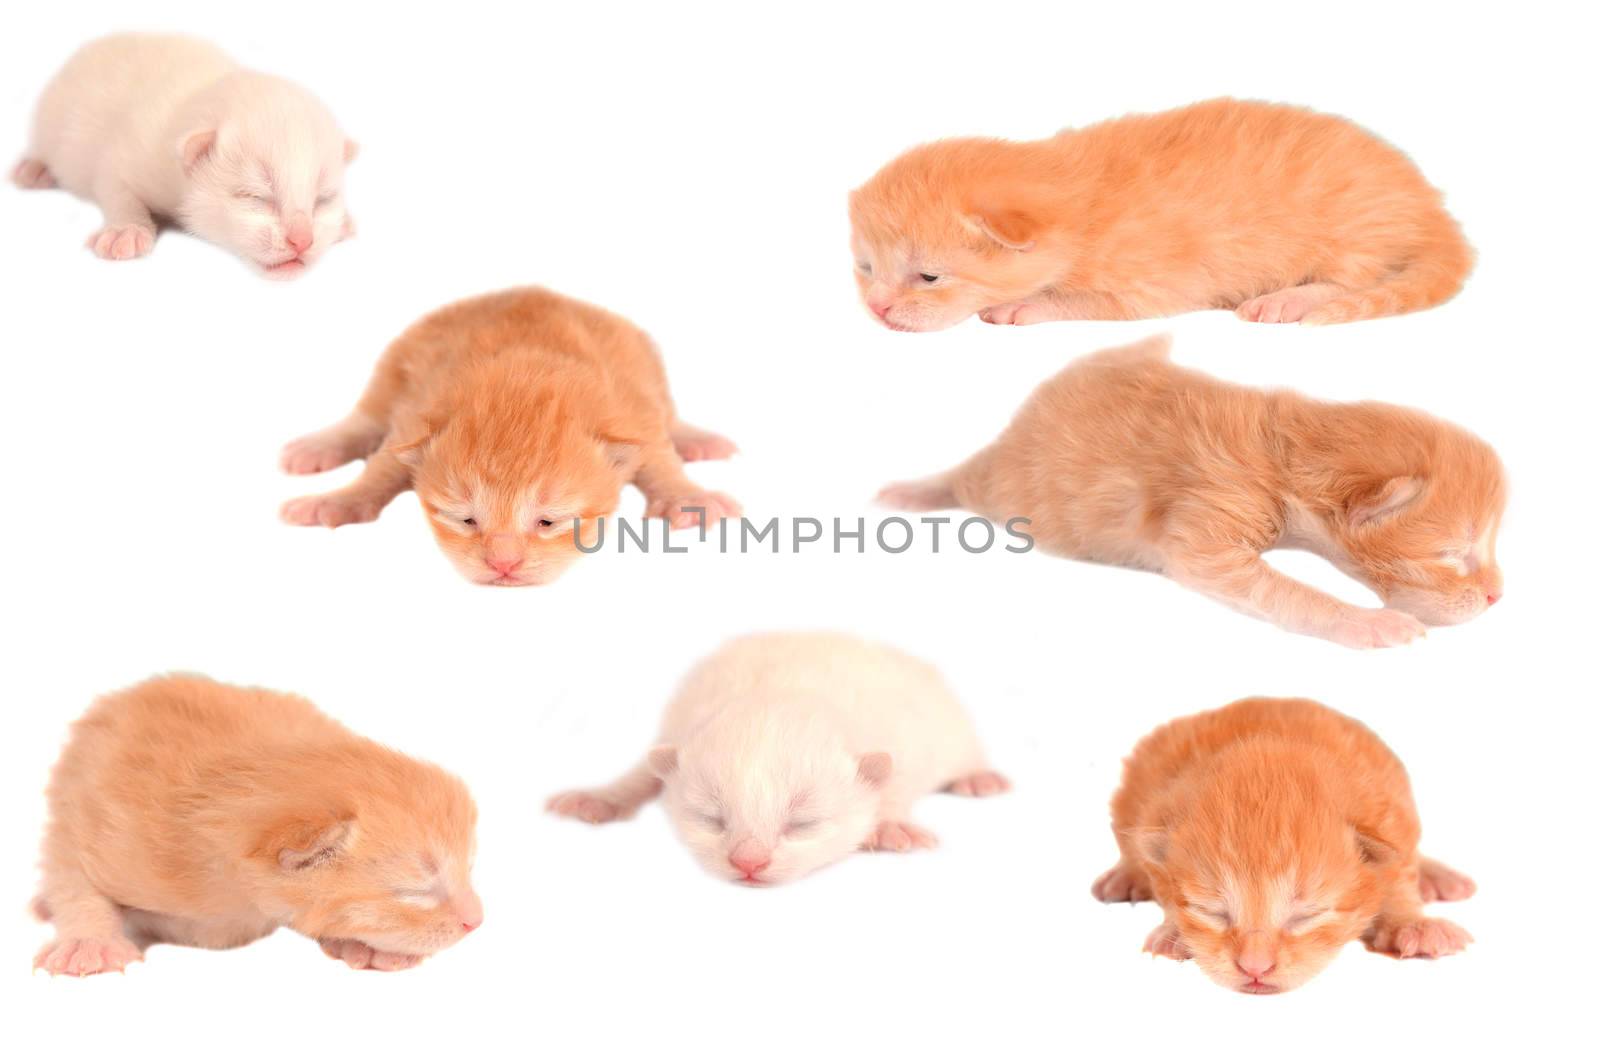 Newborn Kittens on White by dnsphotography